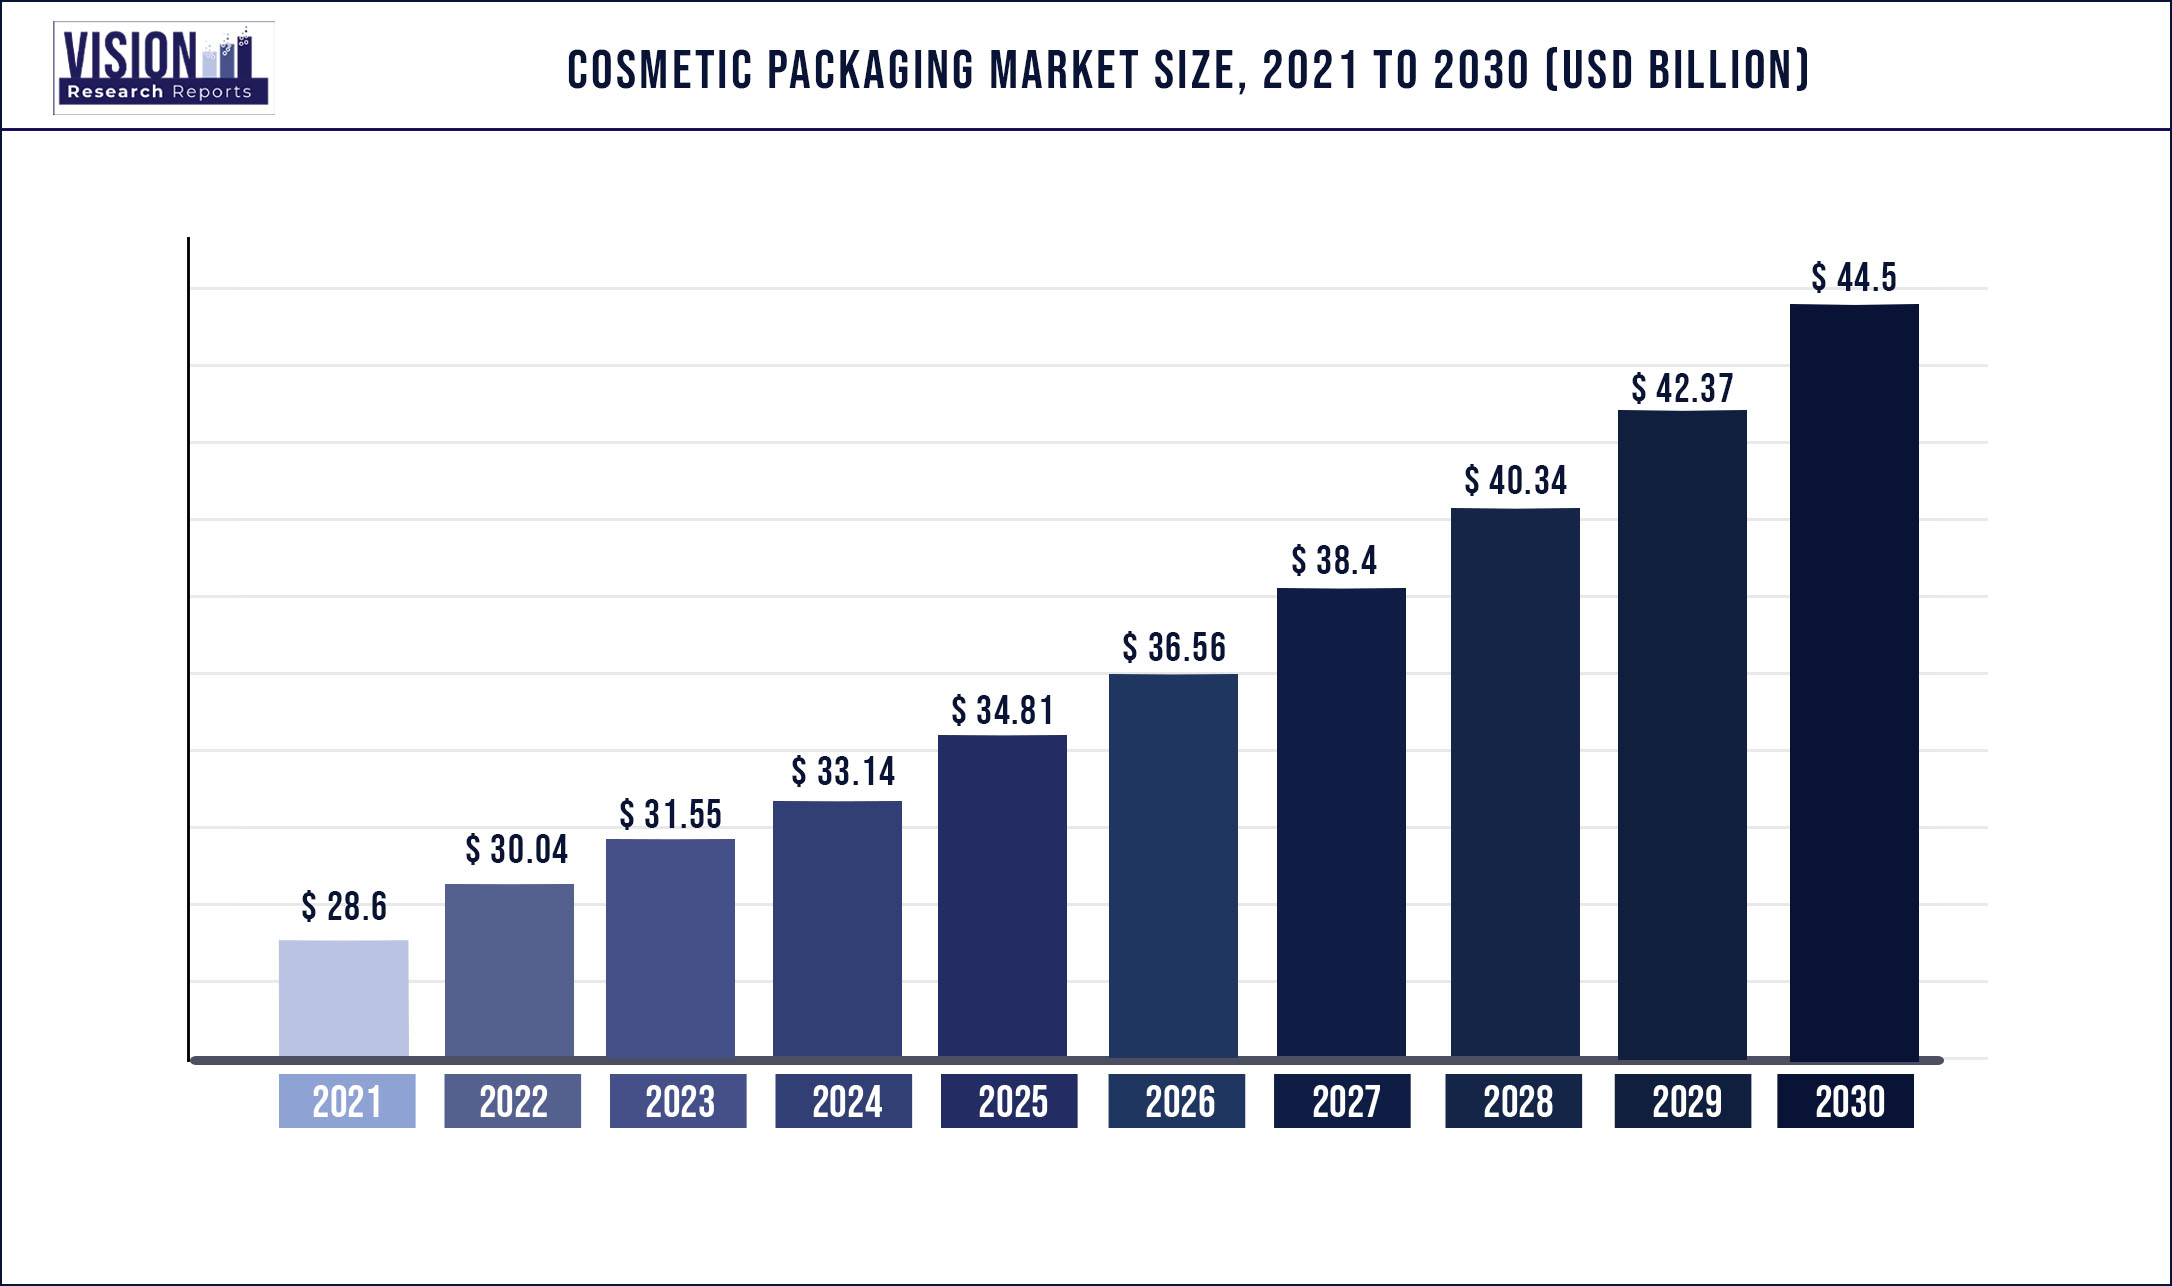 Cosmetic Packaging Market Size 2021 to 2030